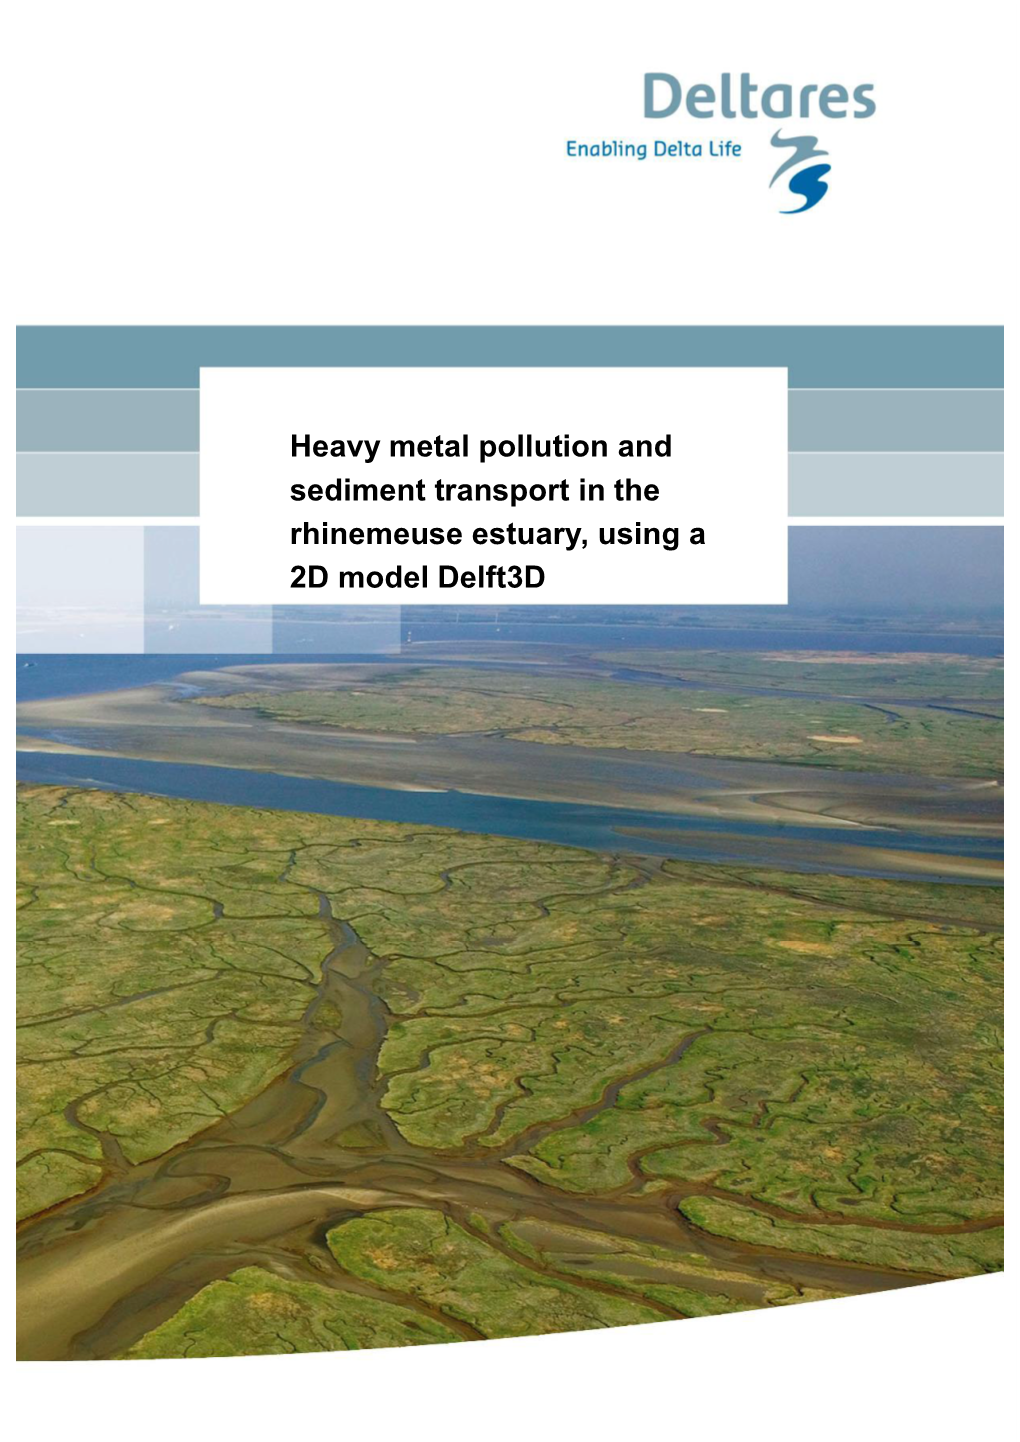 Heavy Metal Pollution and Sediment Transport in the Rhinemeuse Estuary, Using a 2D Model Delft3d